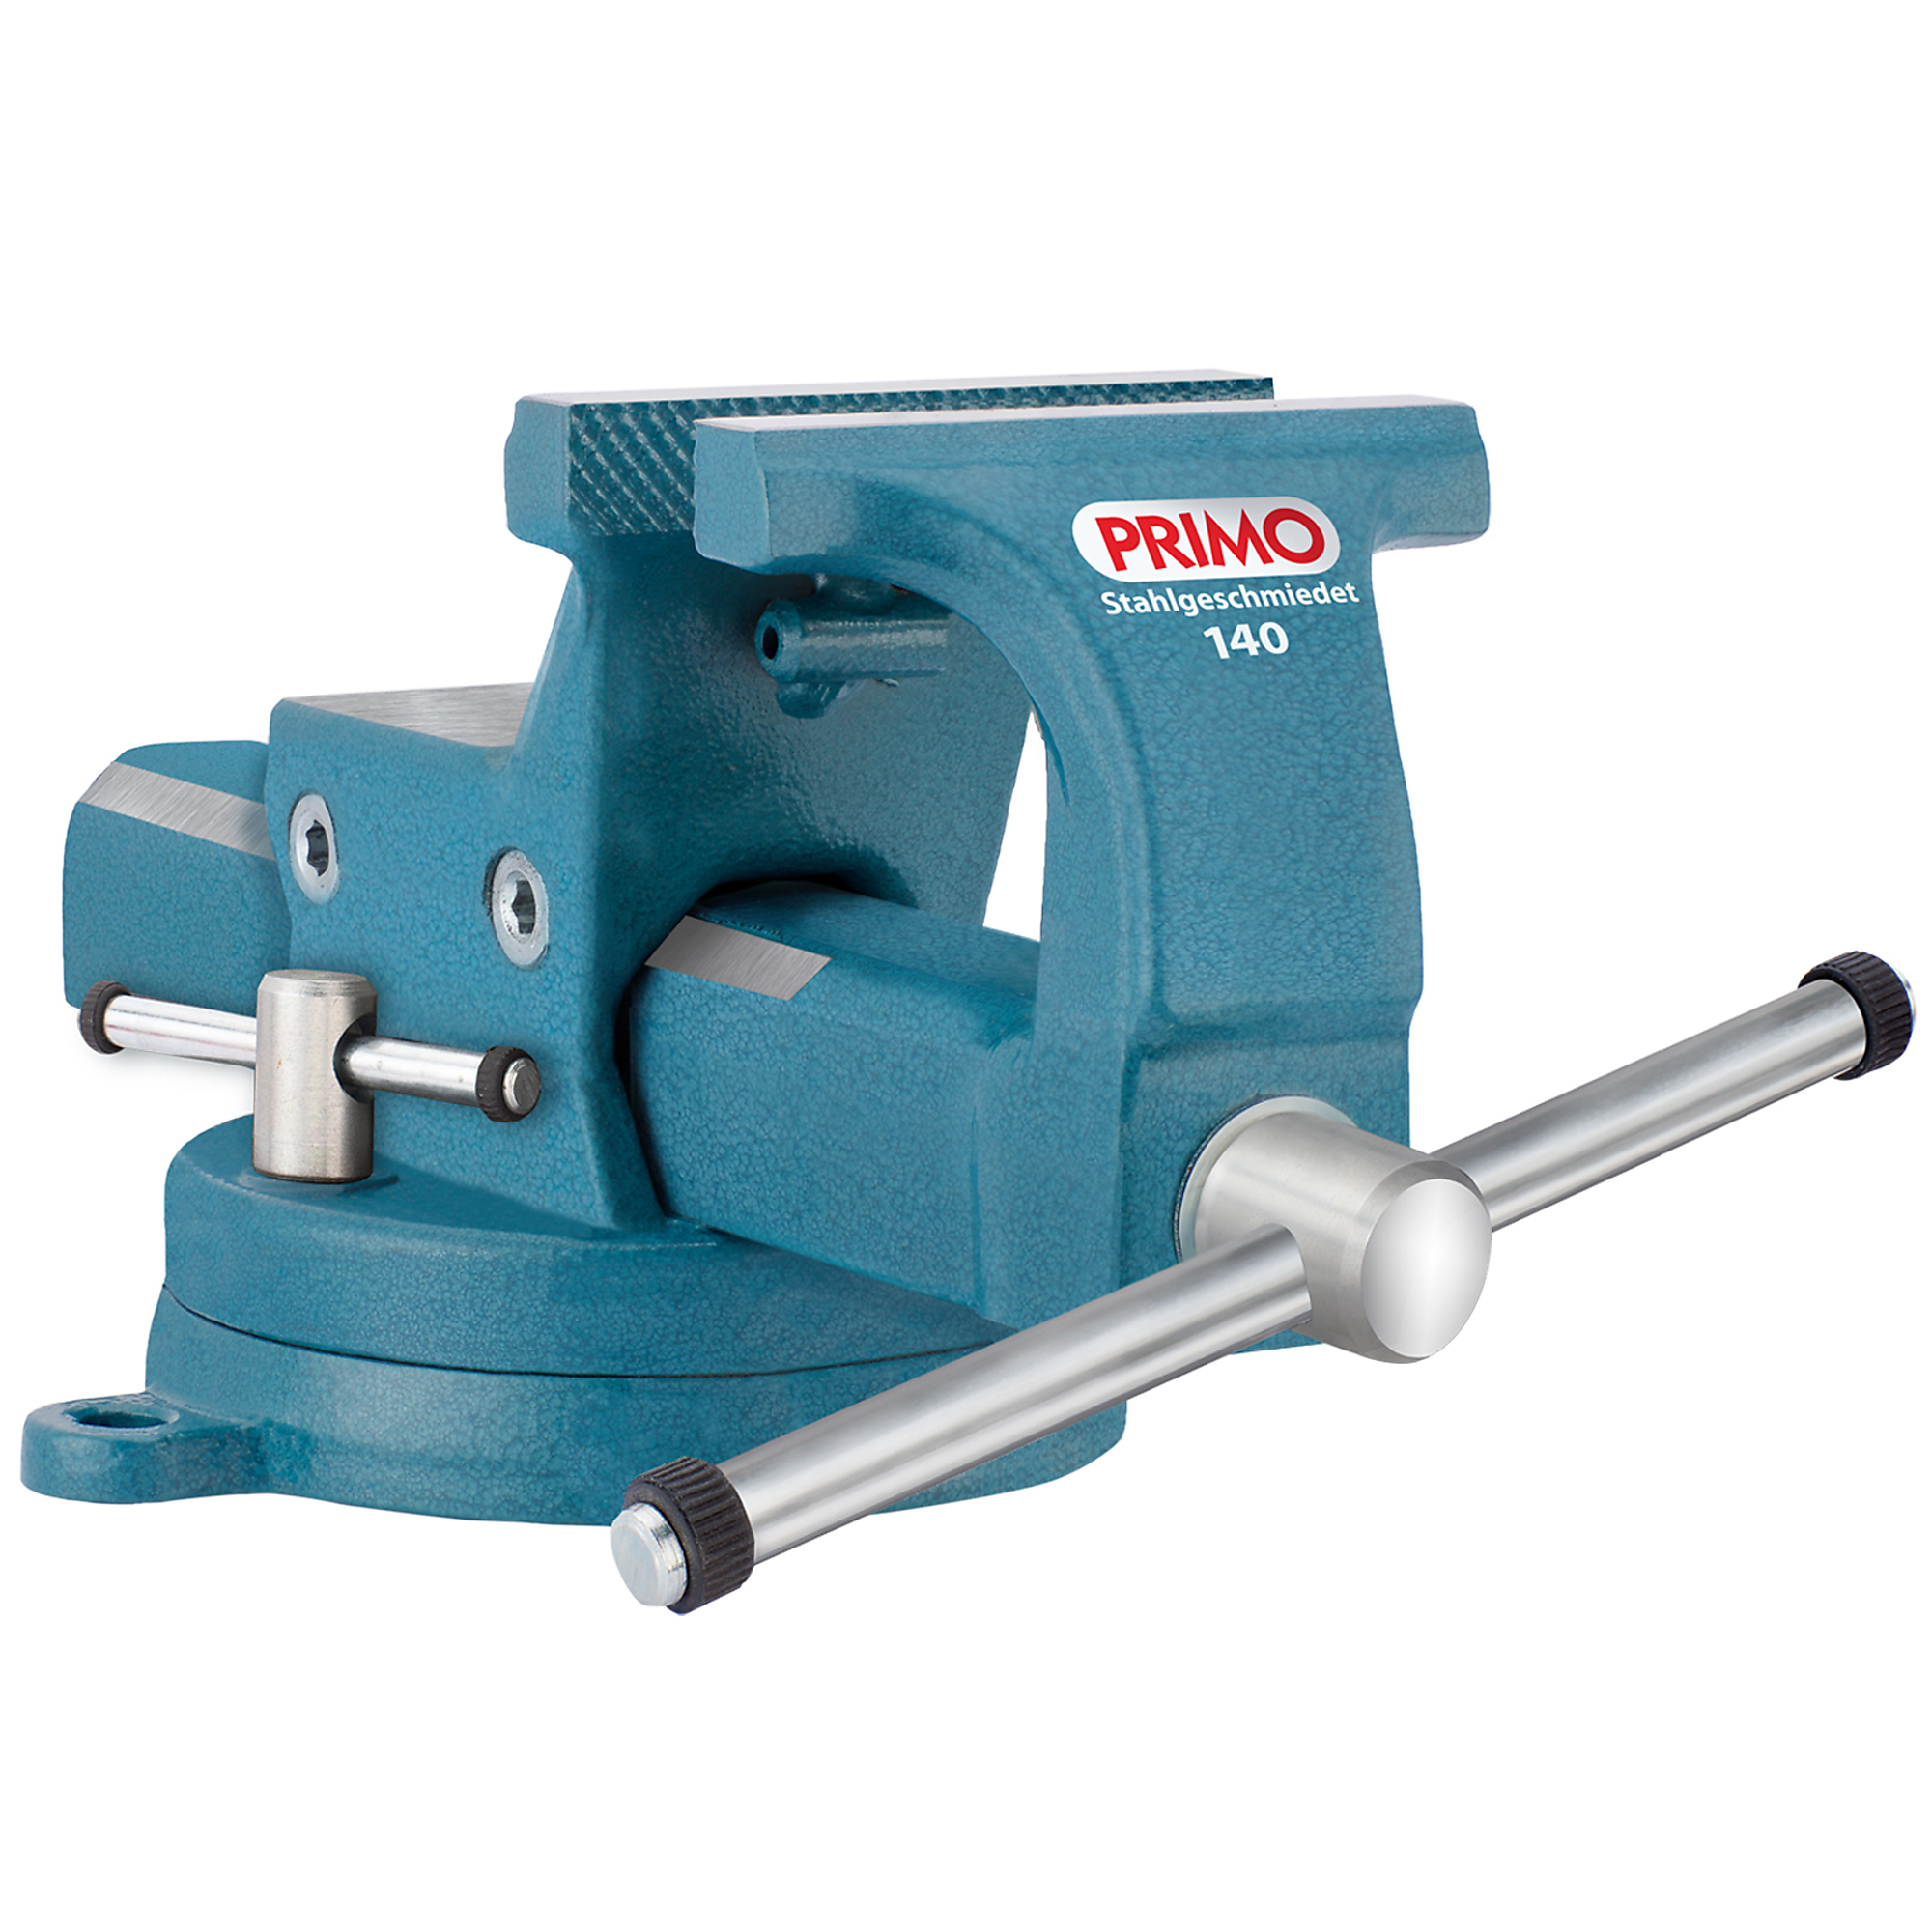 KANCA, PRIMO BENCH VISE w. SWIVEL BASE 120 MM - 4.8Inch, Jaw Width 4.8 in, Jaw Capacity 6 in, Model Primo Bench Vise